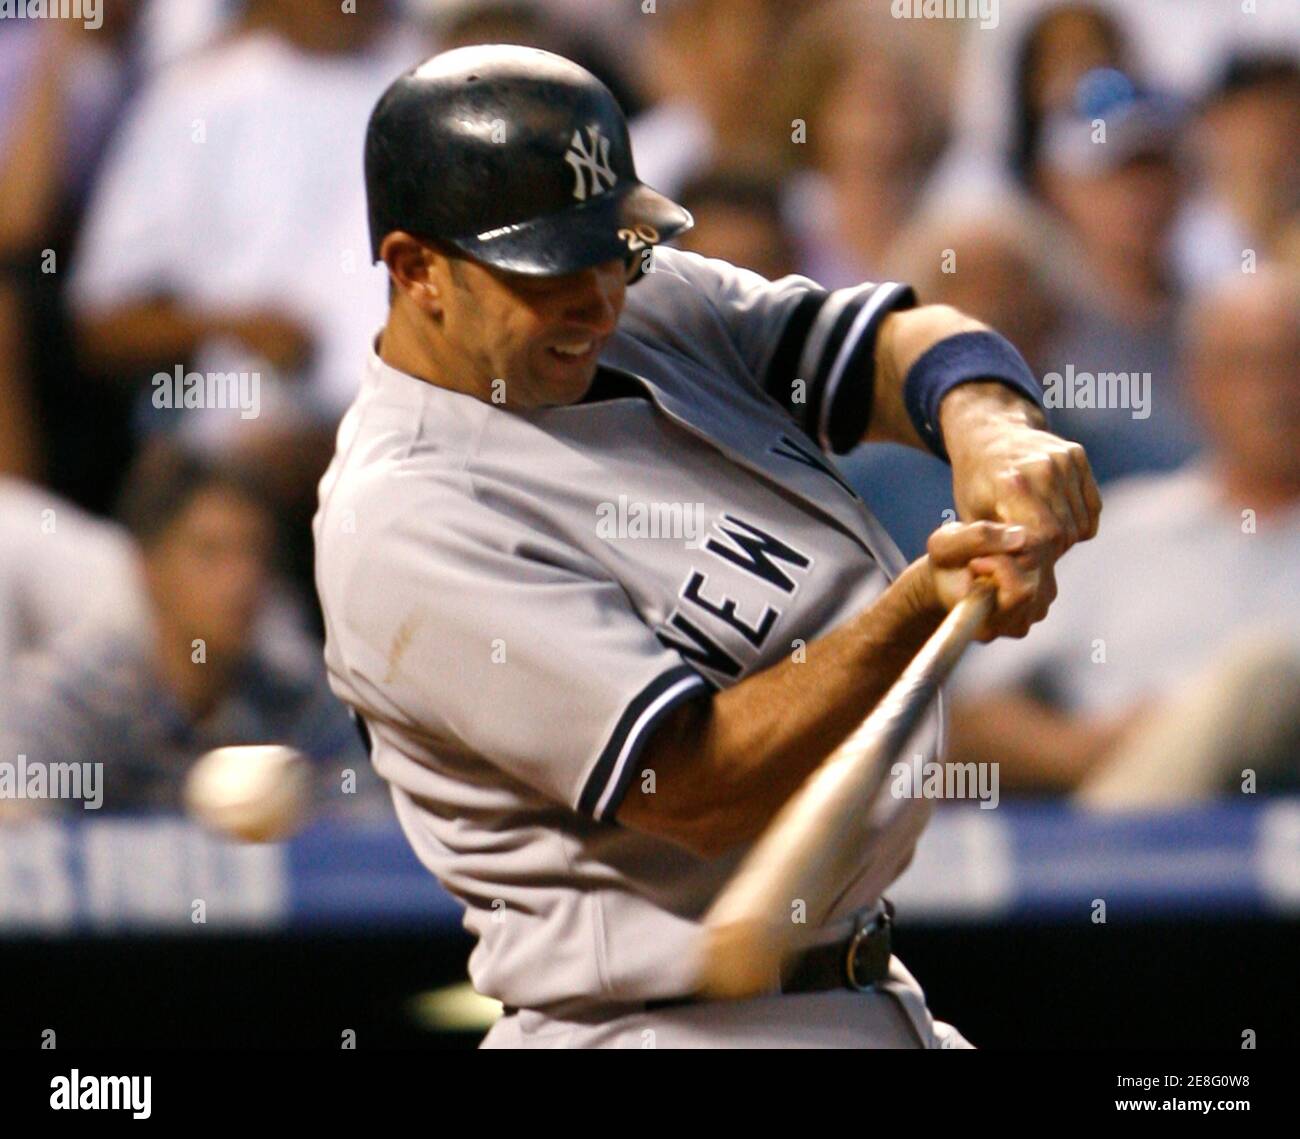 New York Yankees batter Jorge Posada strikes out leaving two men on against the Colorado Rockies in the top of the sixth inning in their MLB interleague baseball game in Denver, Colorado June 20, 2007. REUTERS/Rick Wilking (UNITED STATES) Stock Photo